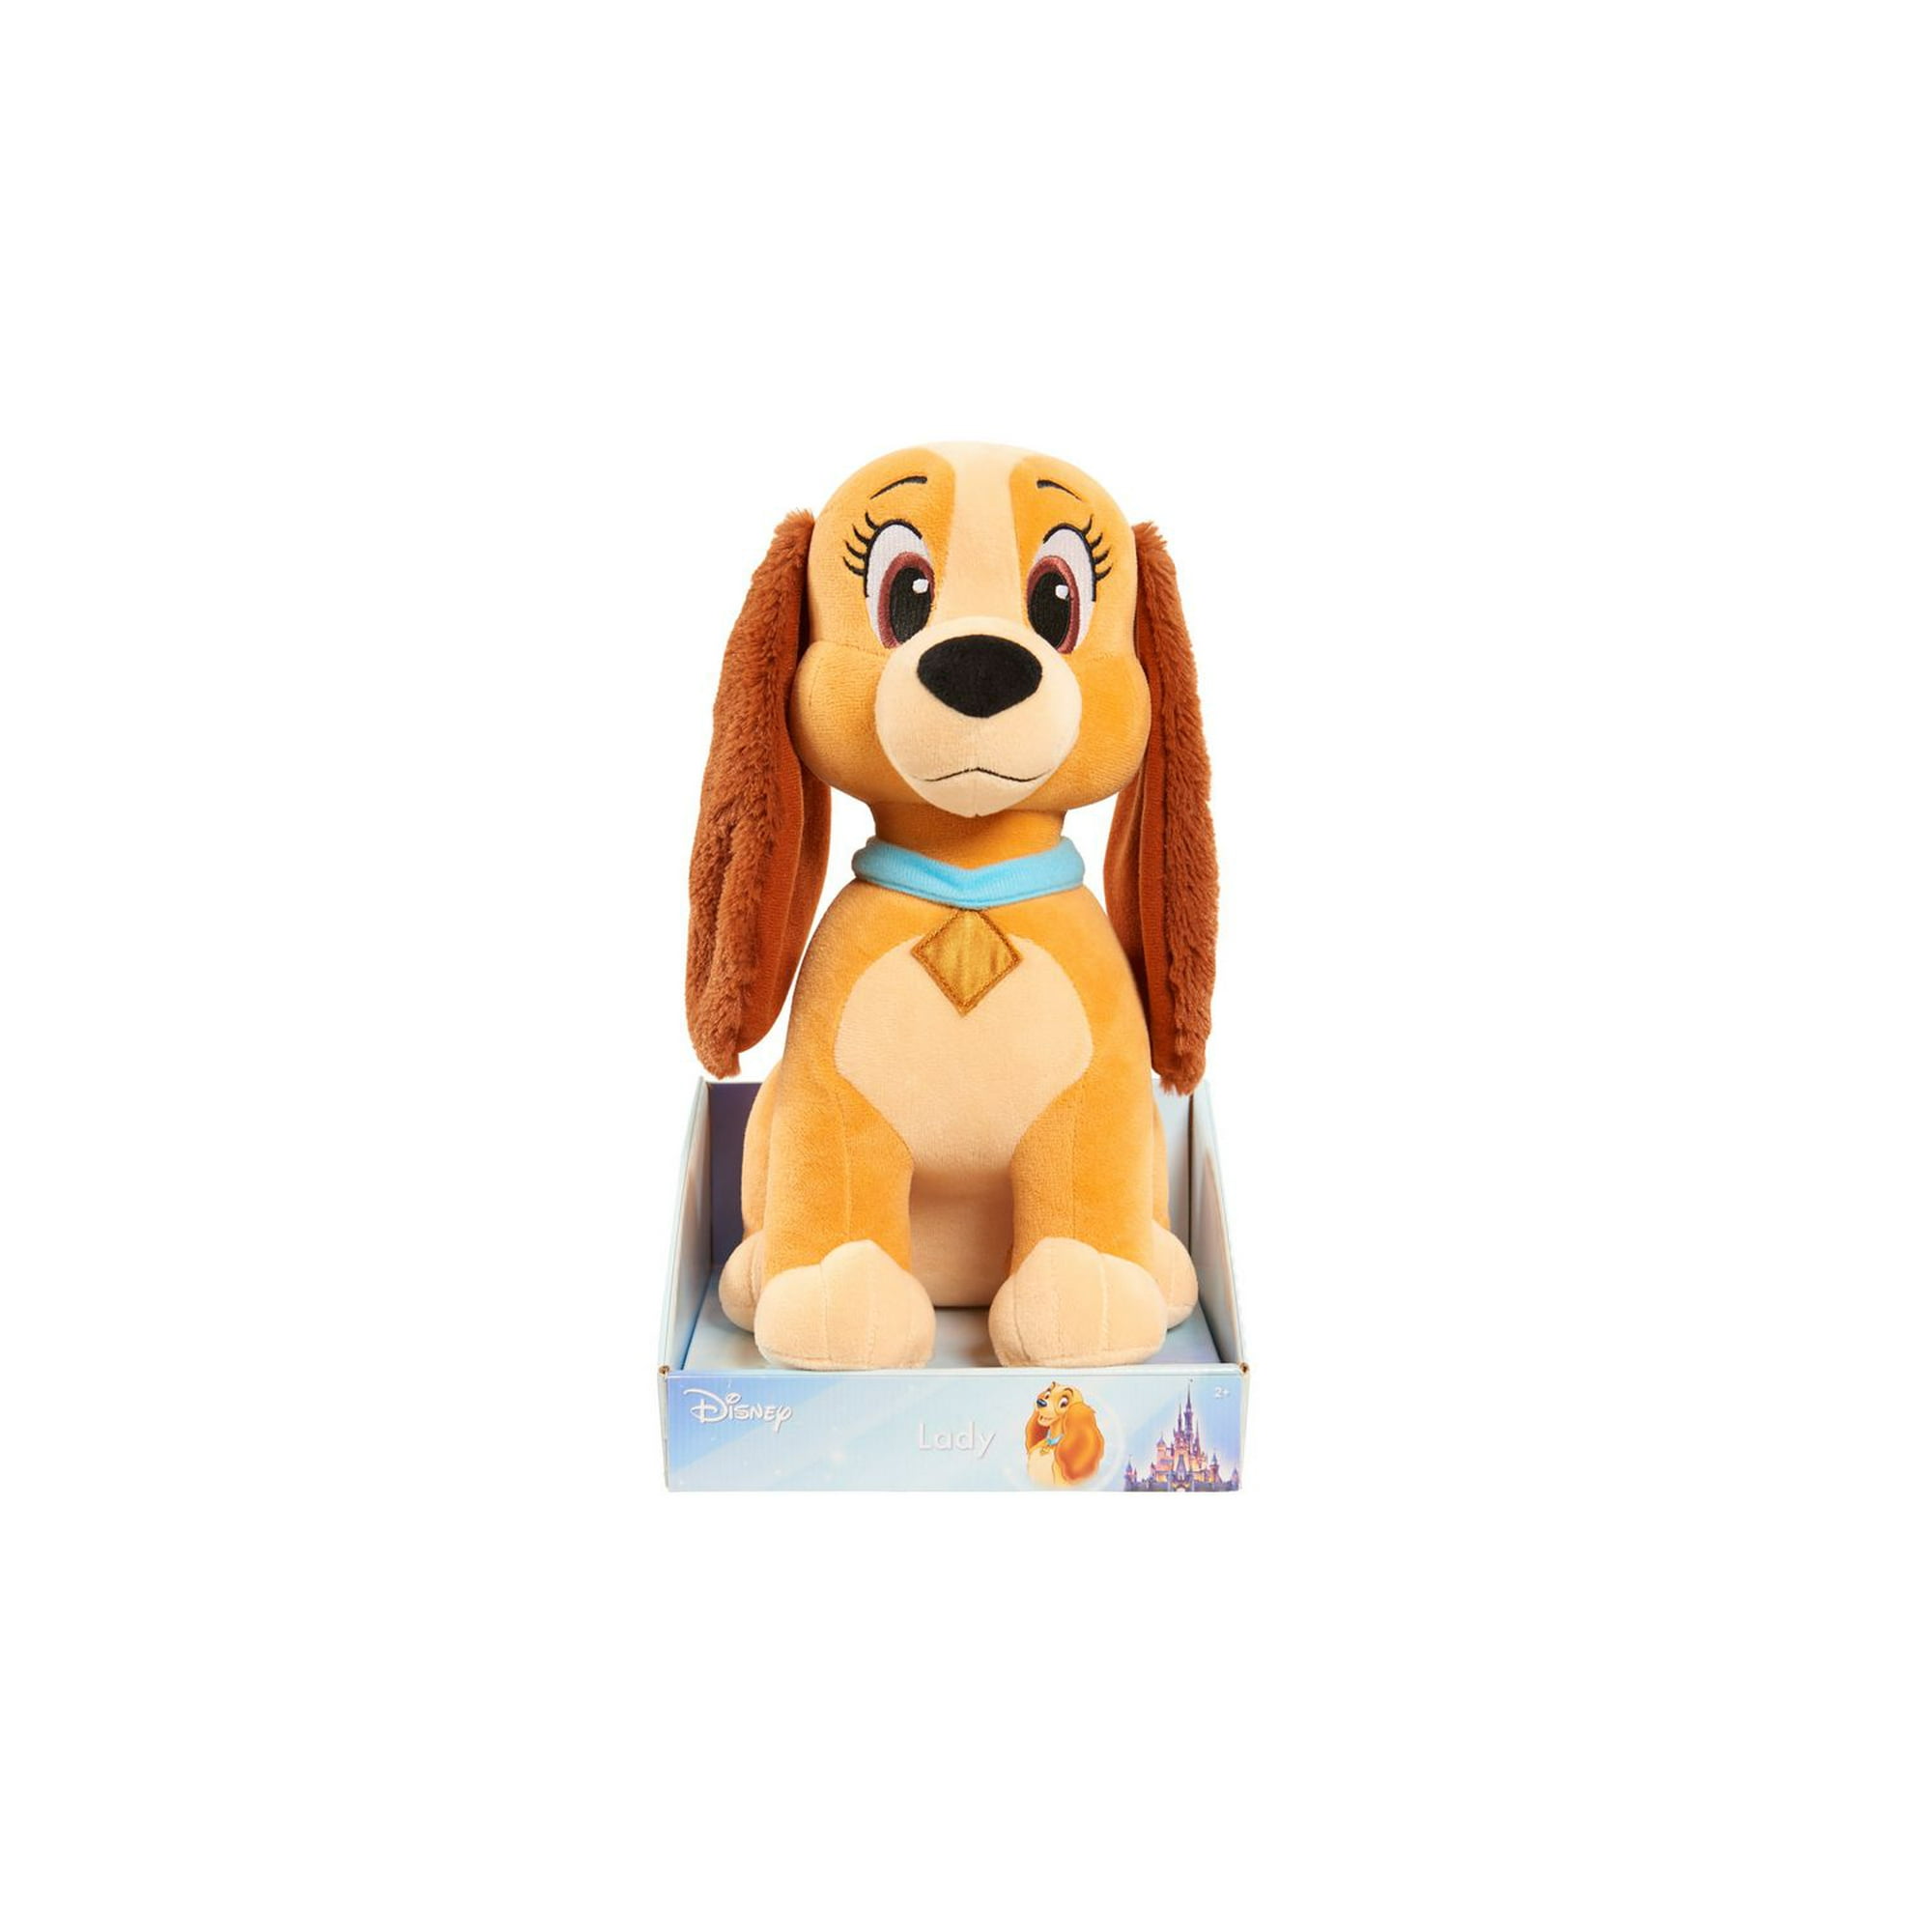 Disney Plush - Lady - Lady and the Tramp - 12